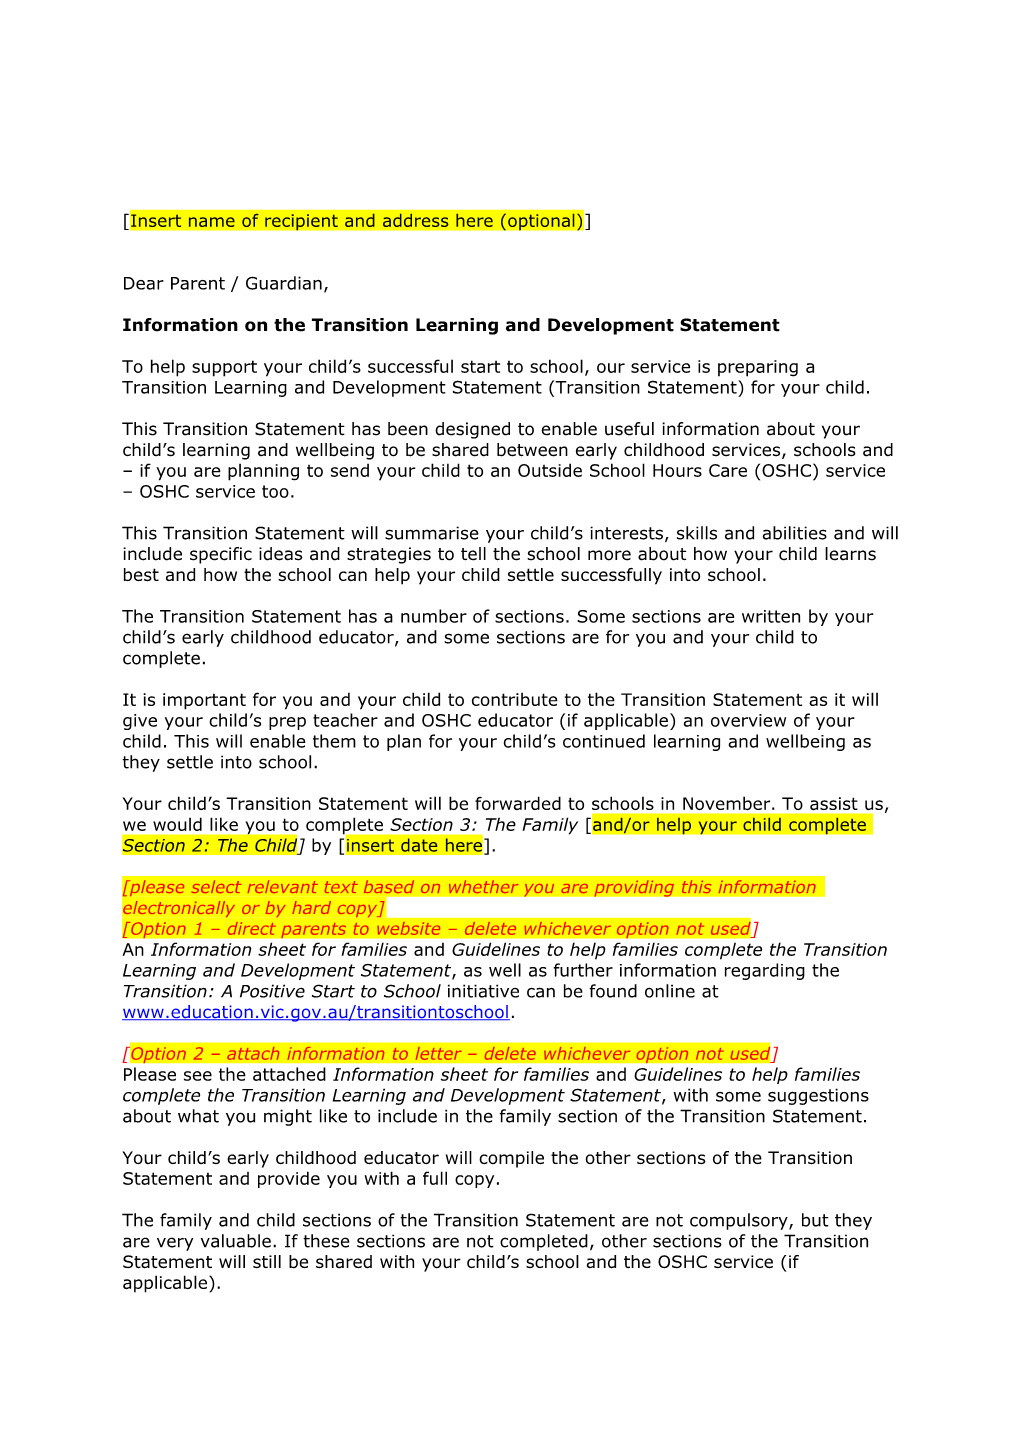 Letter for Families - Transition Learning and Development Statement